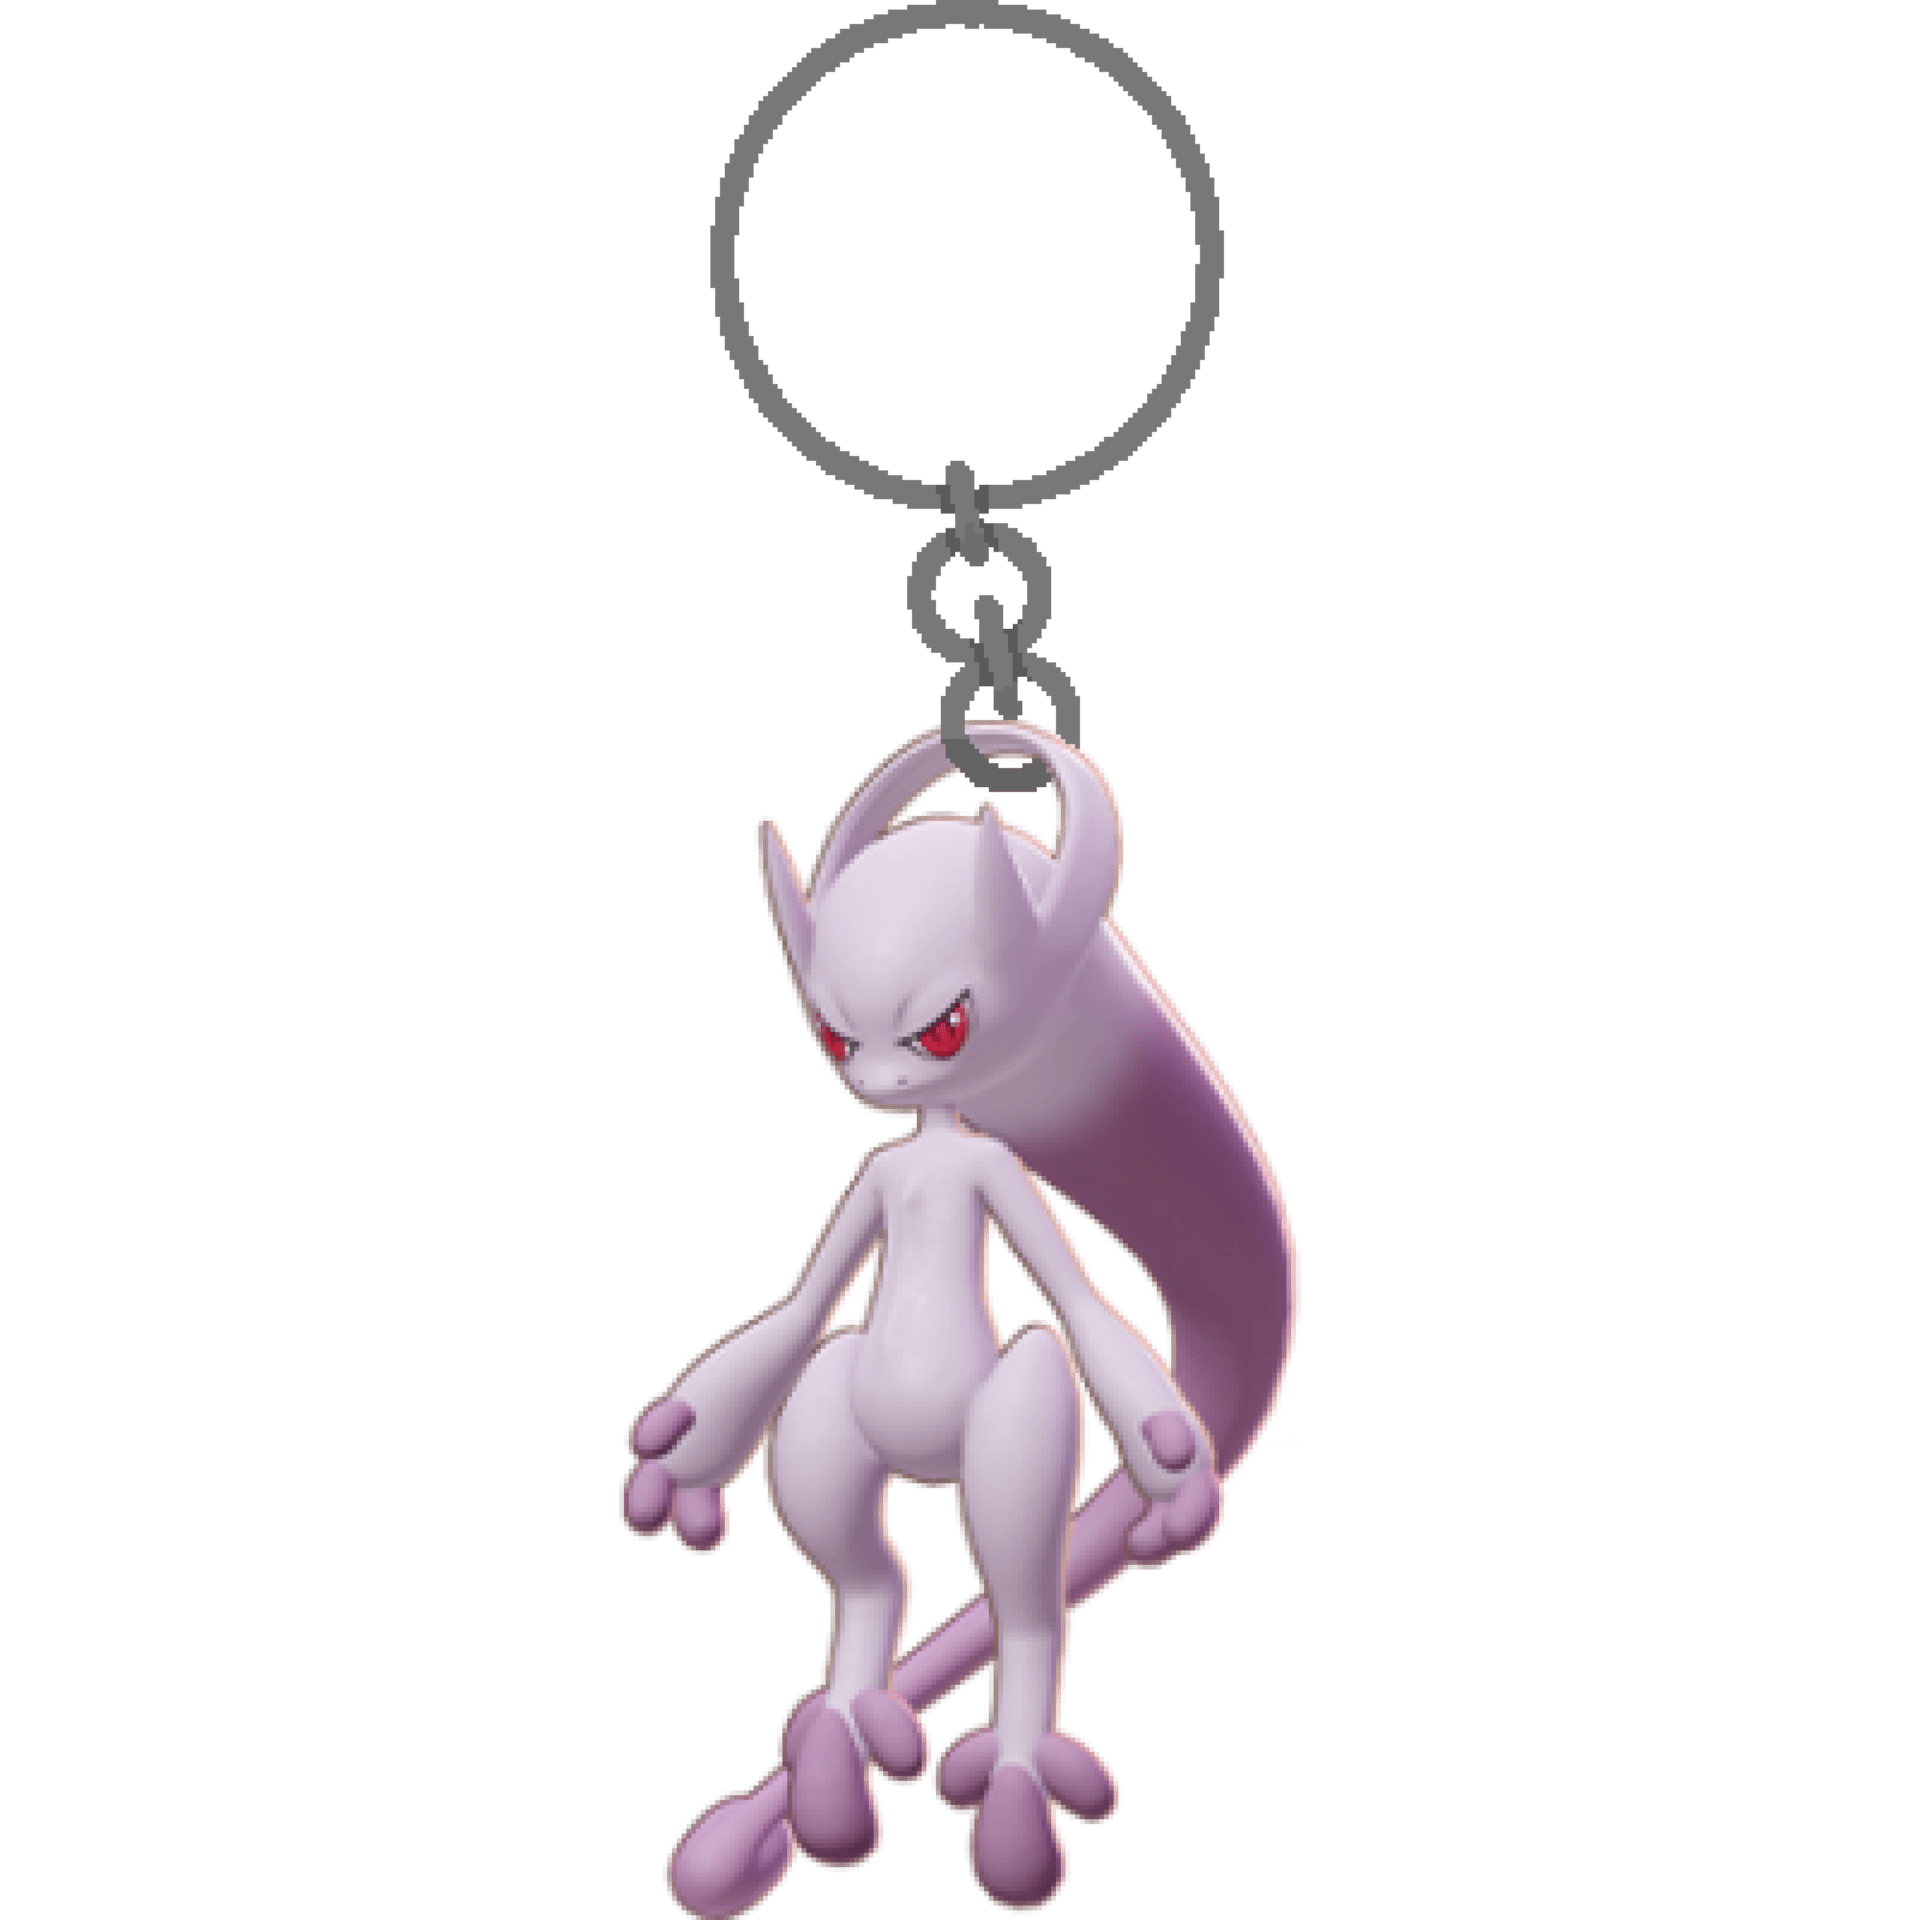 MEGA MEWTWO X *BEST MOVE SET* RIGHT NOW IS THE PSYSTRIKE BUILD